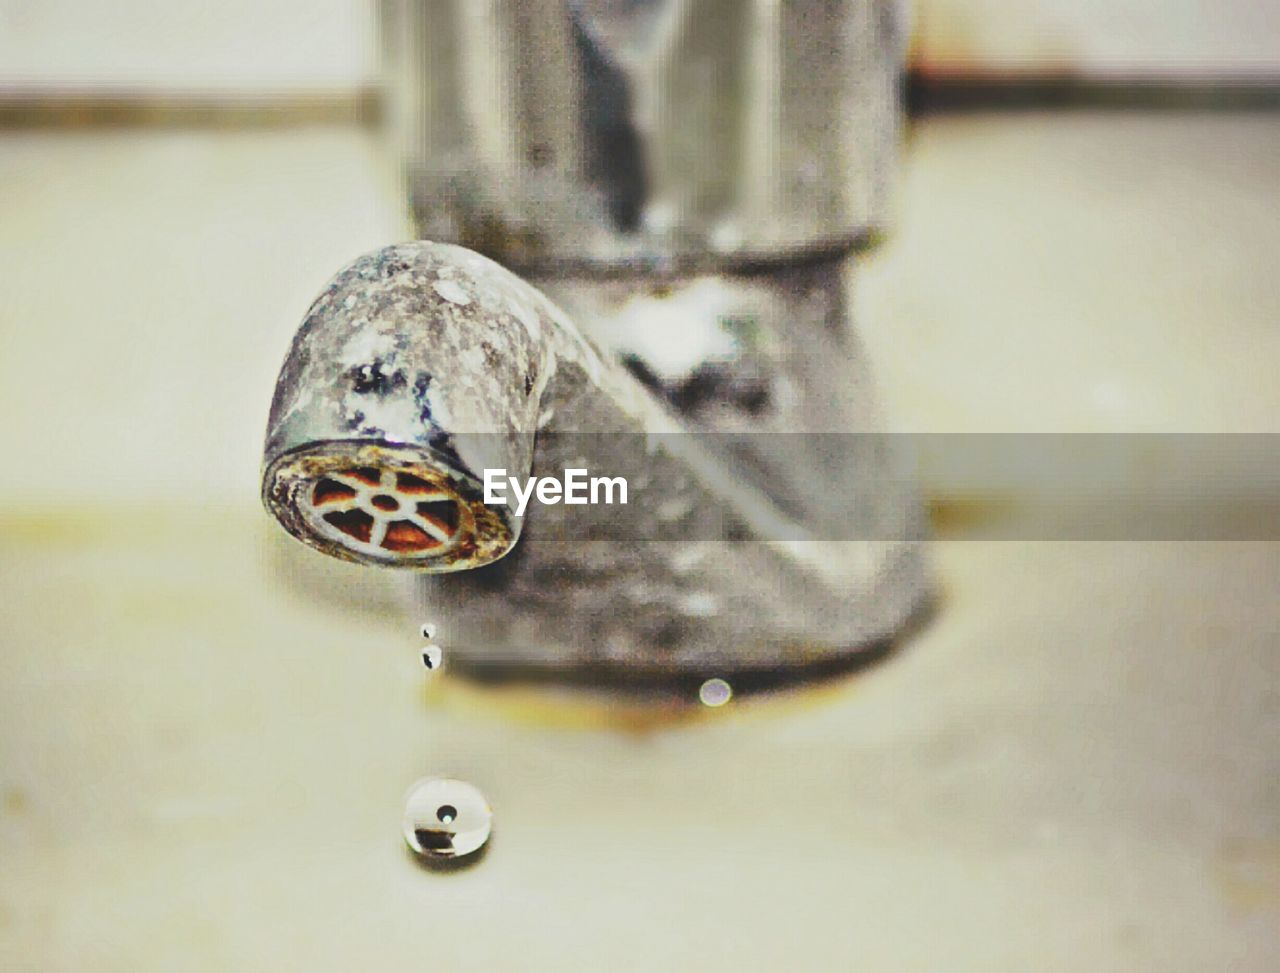 CLOSE-UP OF WATER FROM FAUCET IN CONTAINER